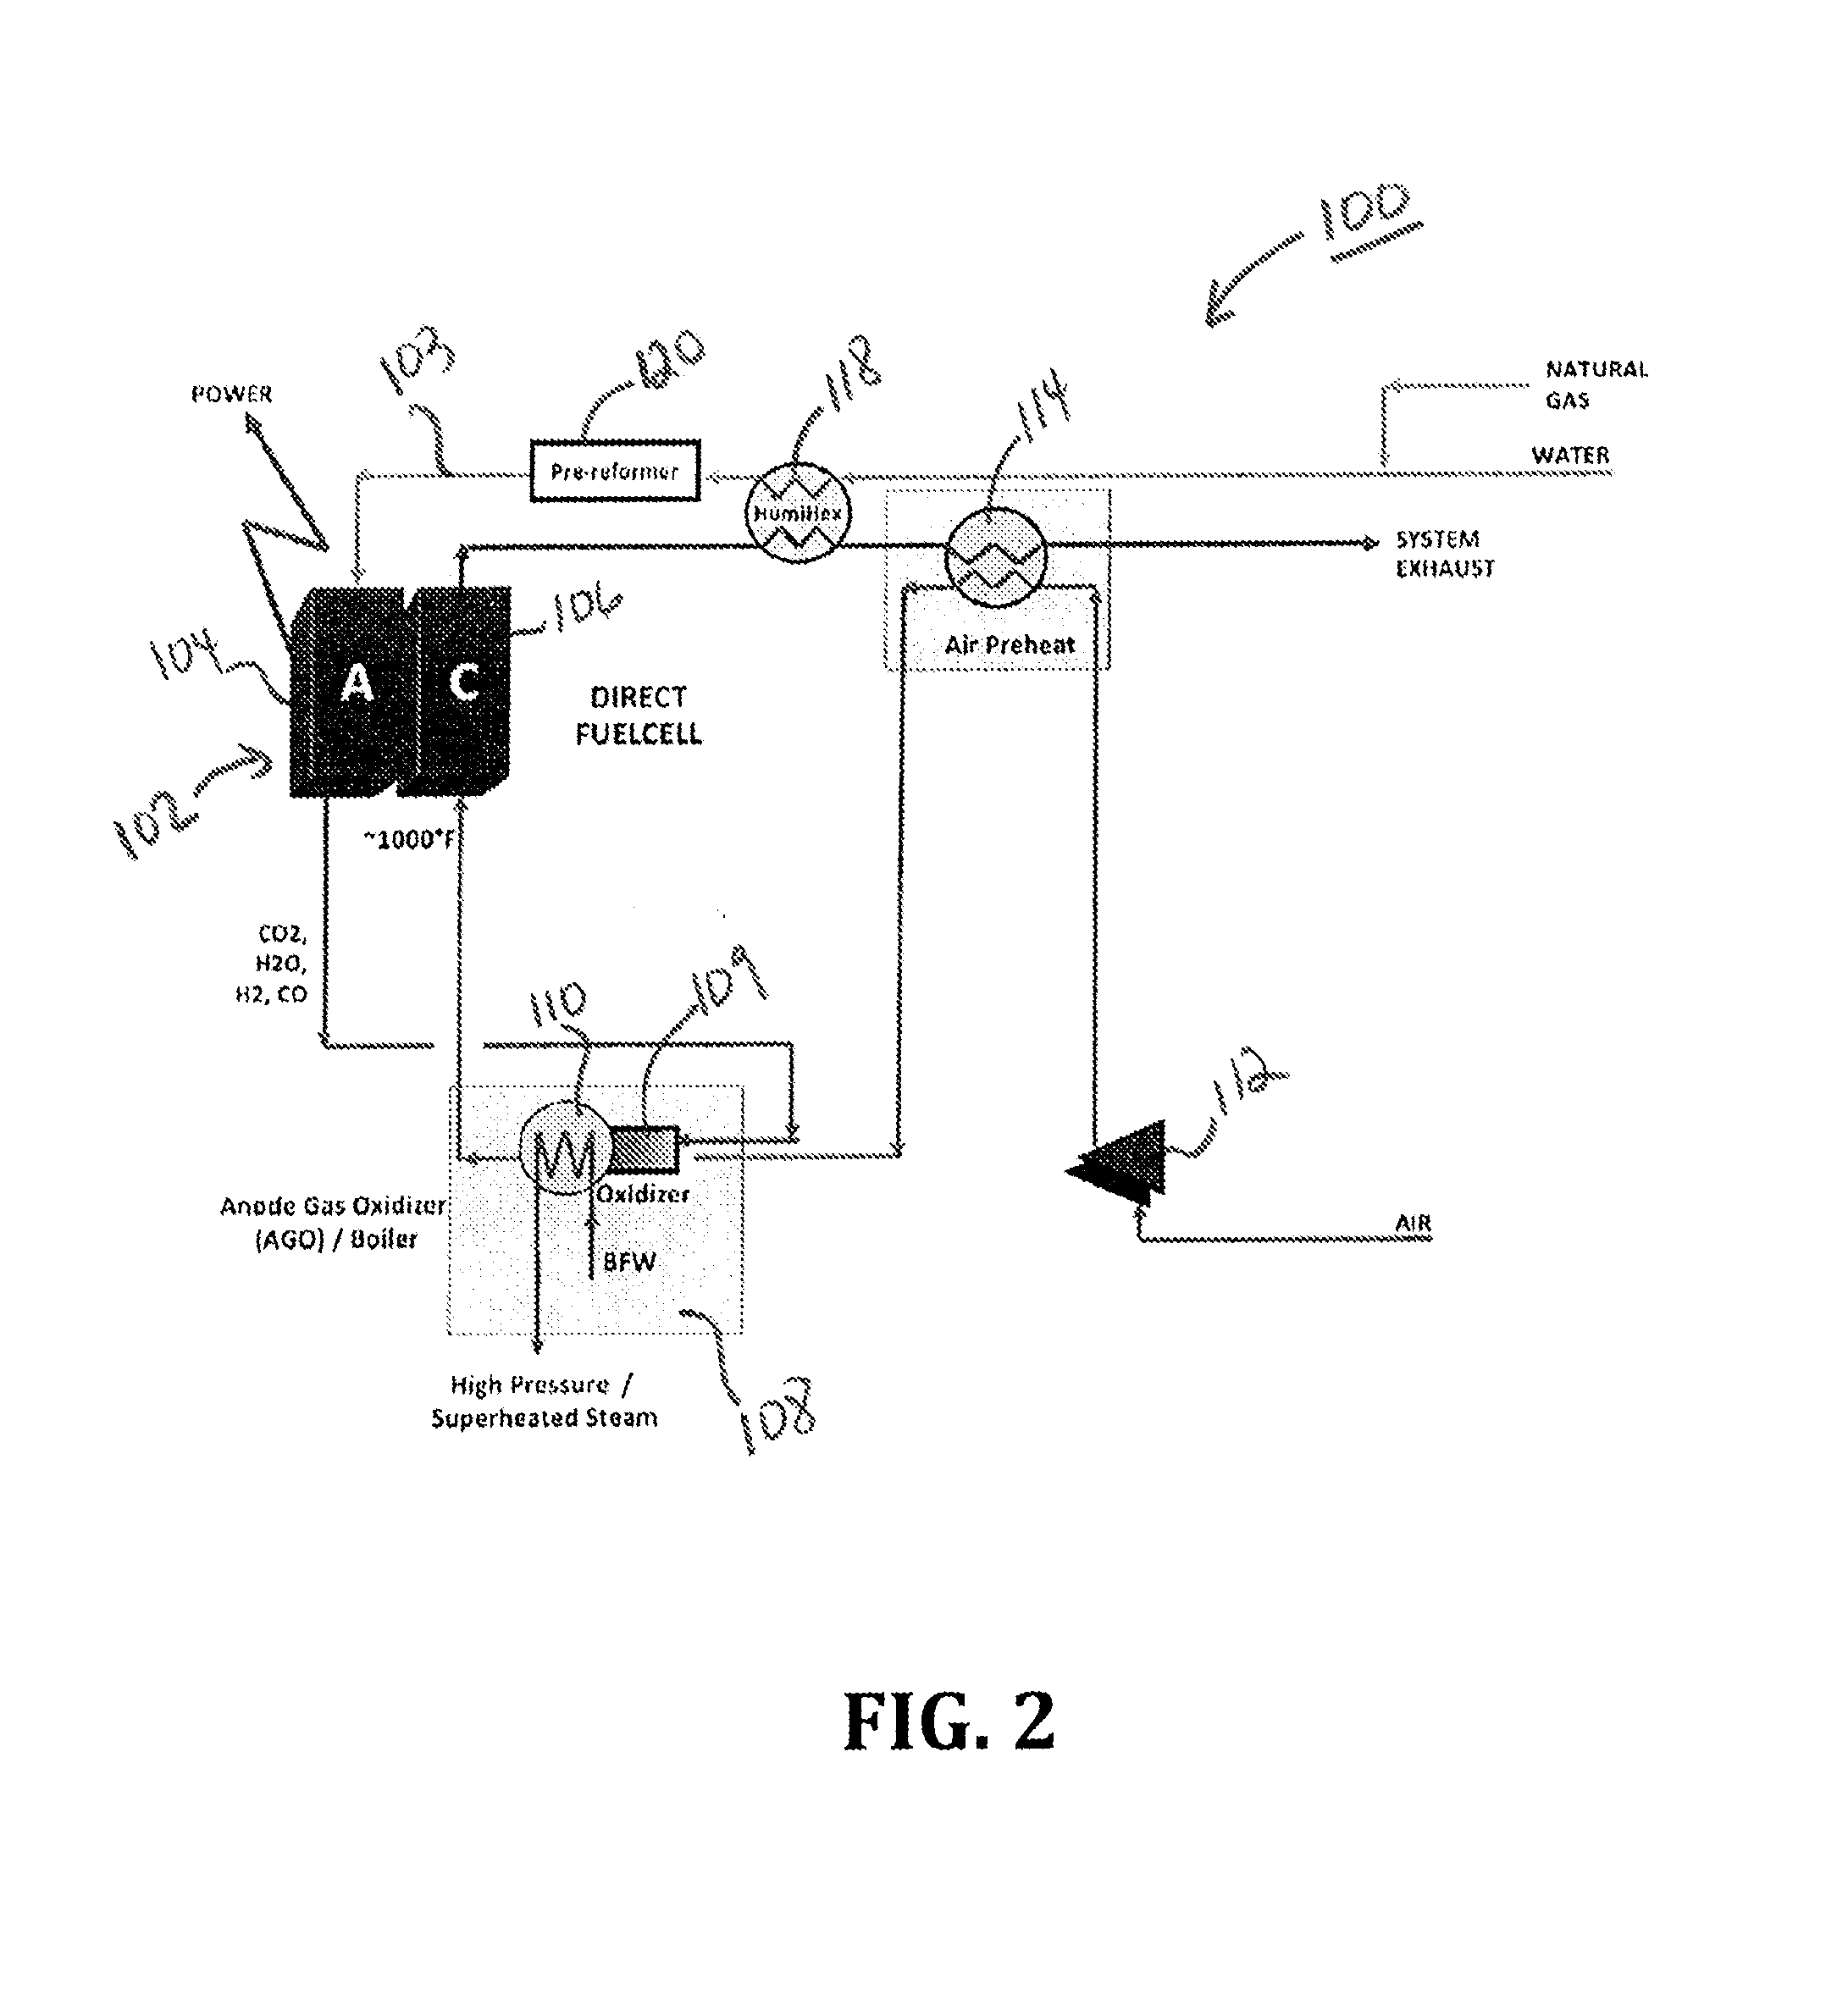 Fuel cell system with waste heat recovery for production of high pressure steam